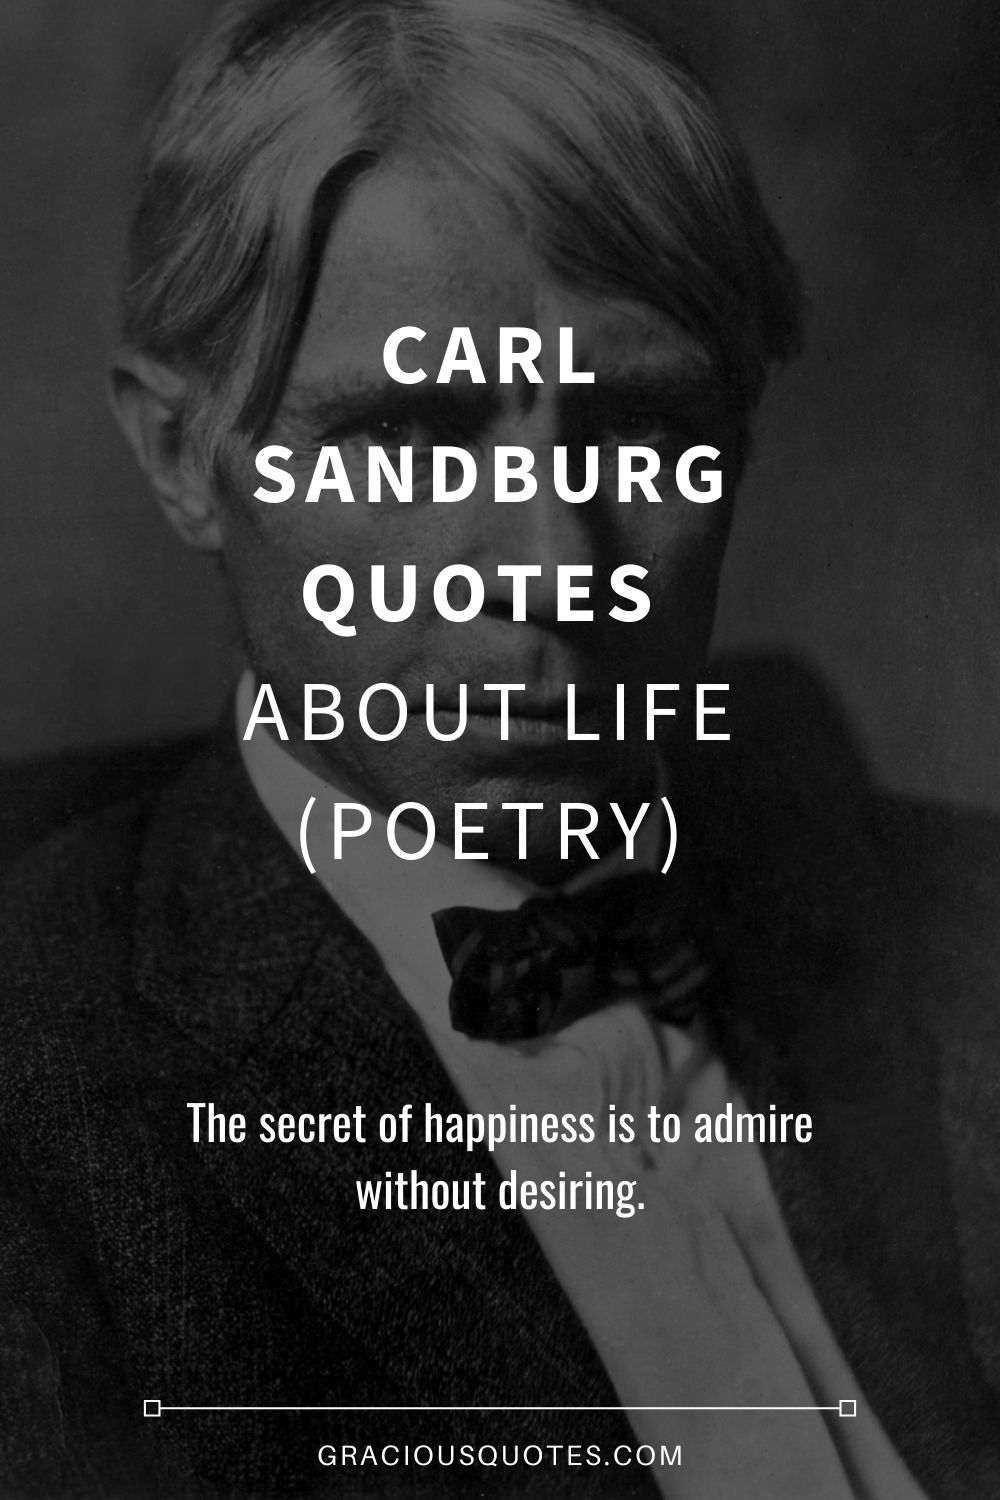 Carl Sandburg Quotes About Life (POETRY) - Gracious Quotes